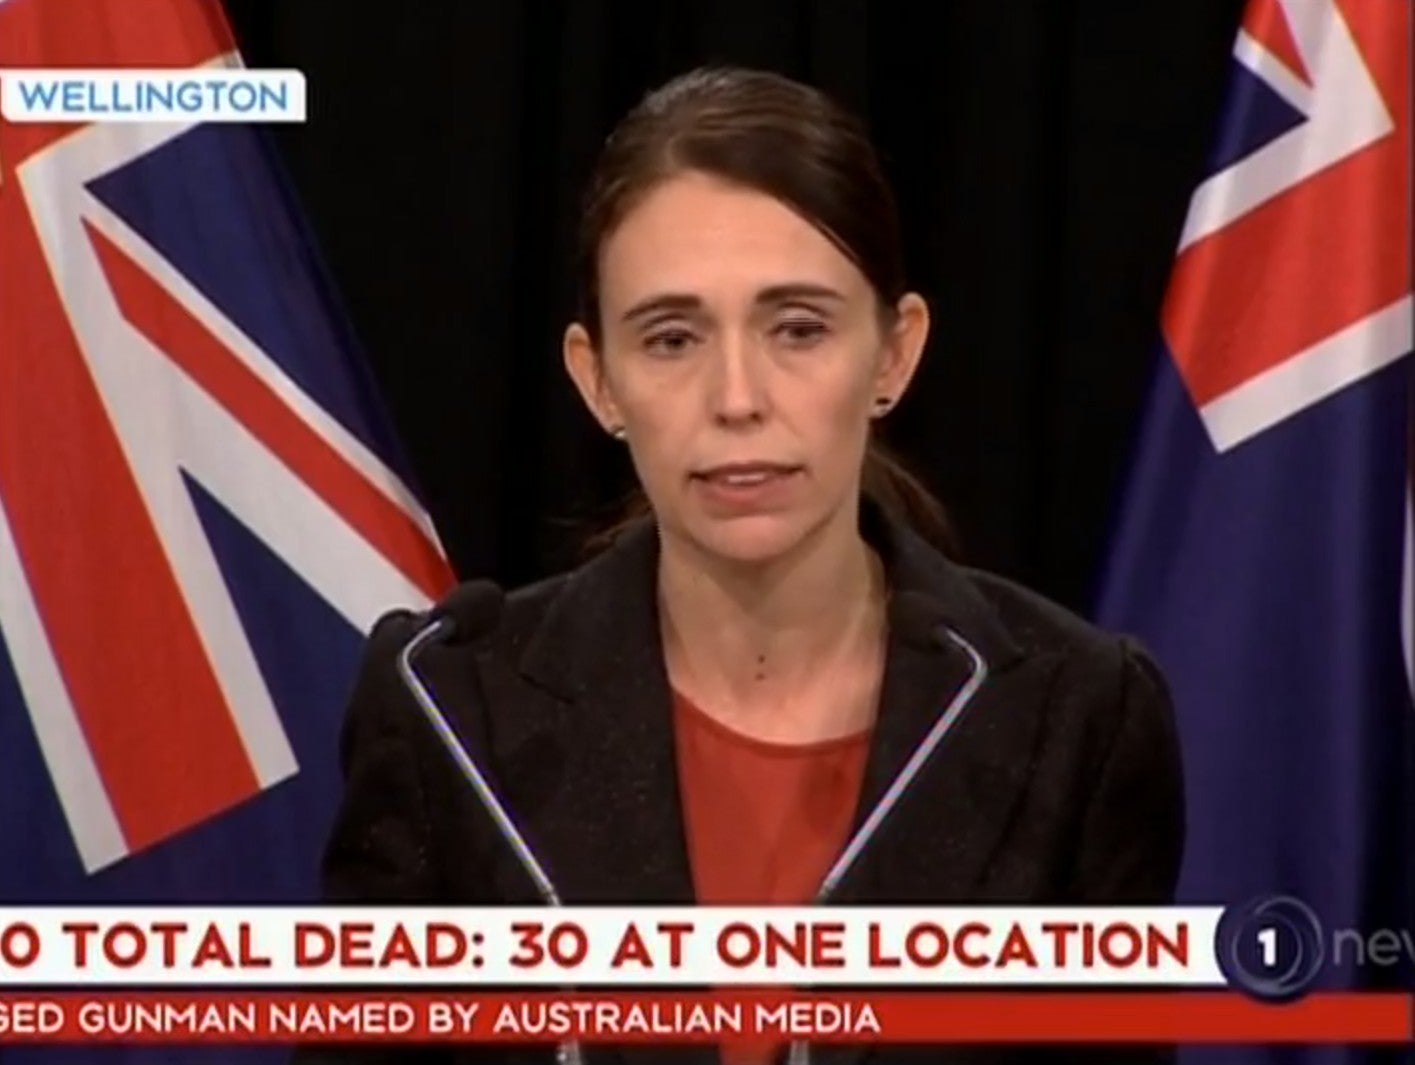 "This Is One Of New Zealand's Darkest Days" NZ PM Condemns Shooting as Terrorist Attack - WORLD OF BUZZ